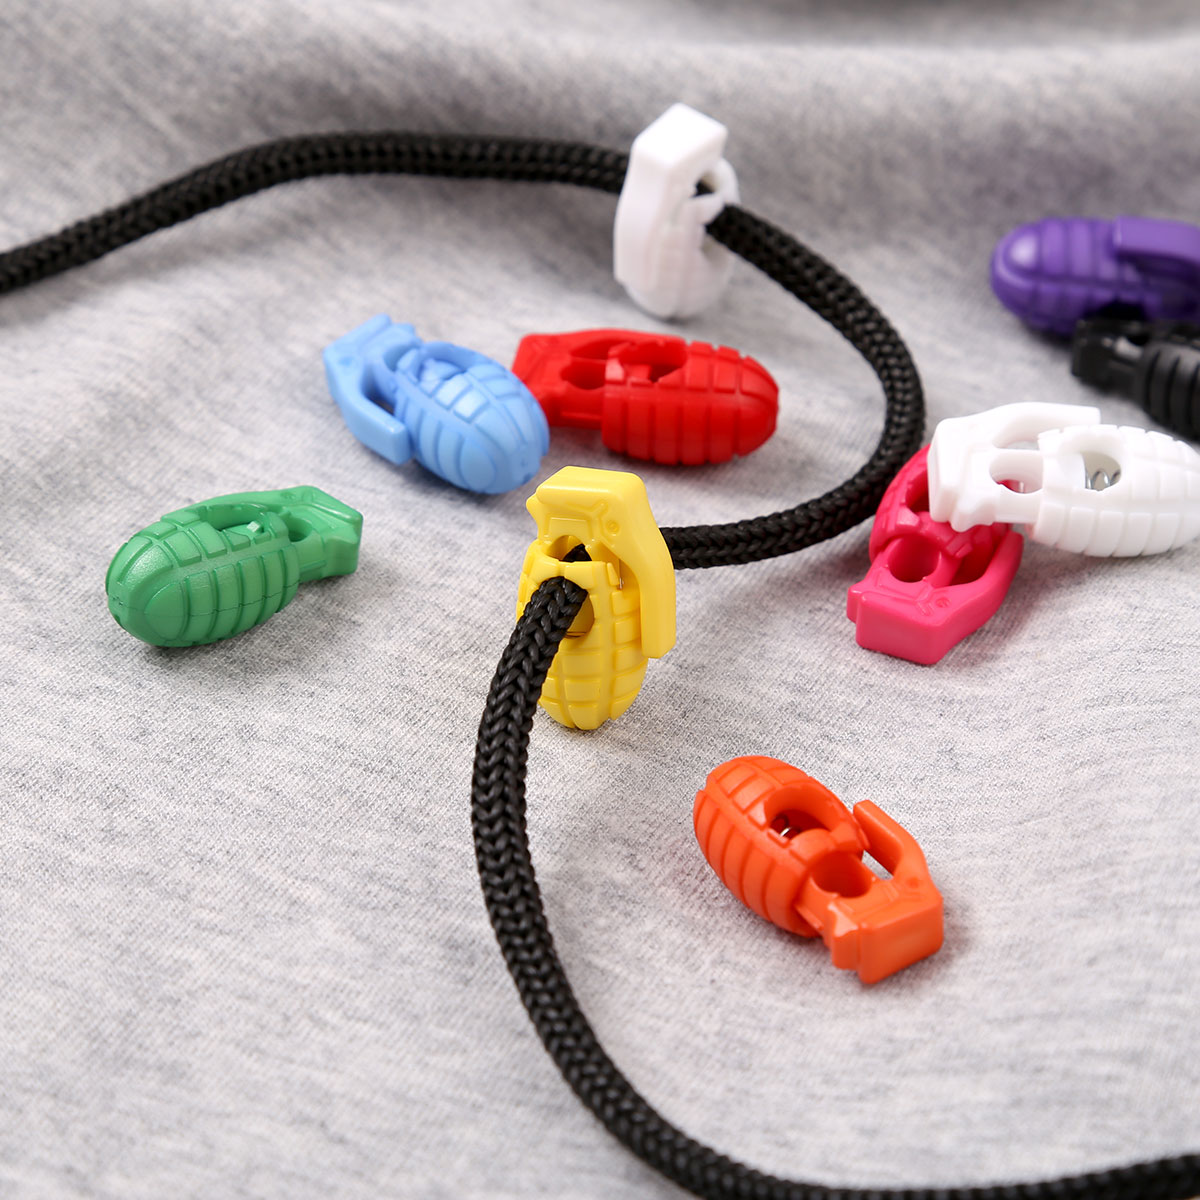 20Pcs Plastic Cord Lock Buckles Grenade Toggle Single Hole Spring Clasp Cord Stopper For Paracord Apparel Shoelace Lanyard Rope